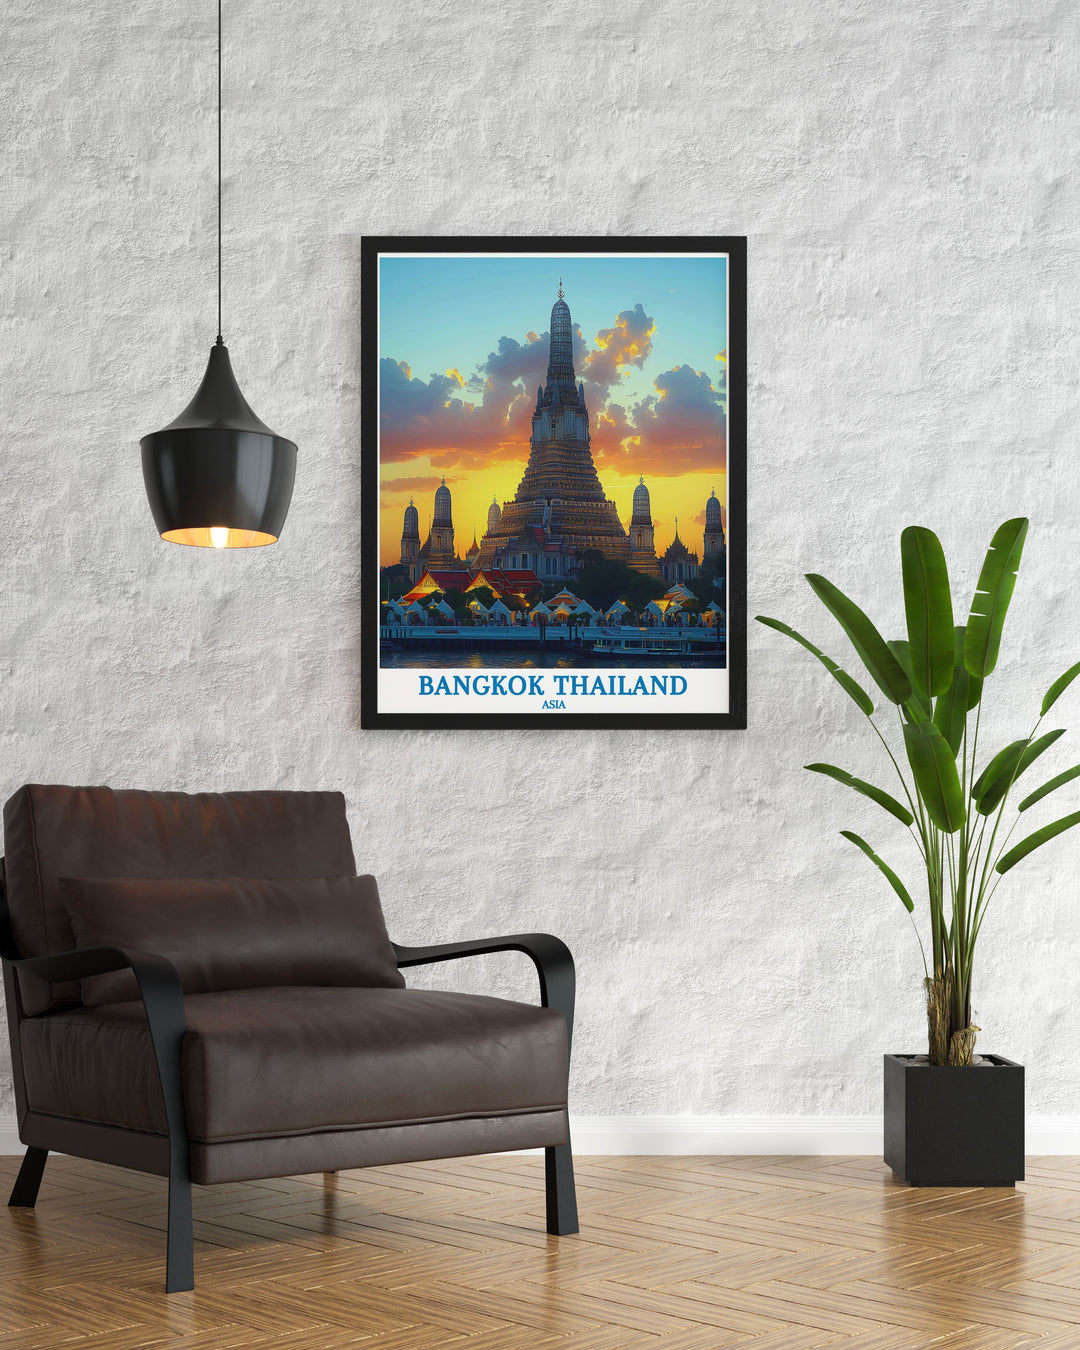 Thai temple art print featuring the serene and detailed facades of Wat Arun, perfect for bringing peace and cultural beauty into your home or office.